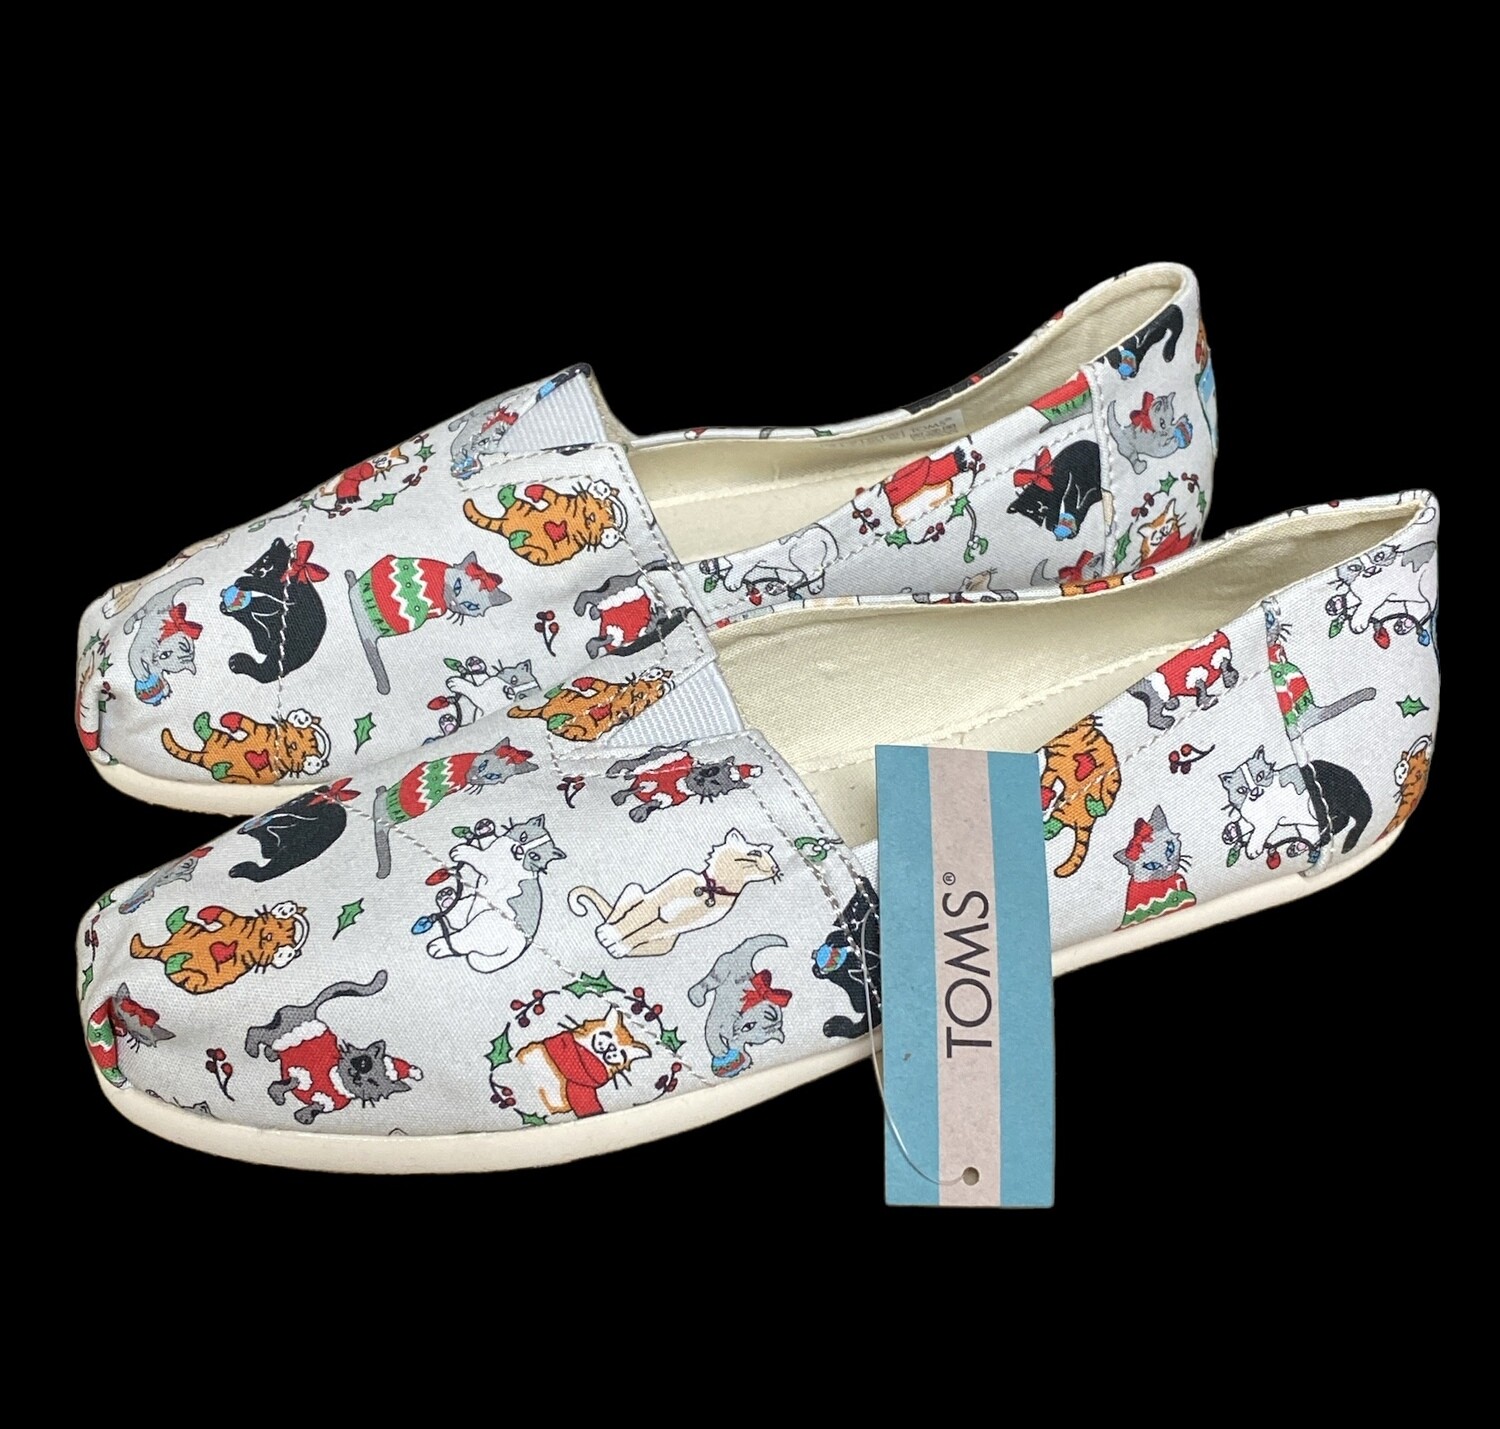 New TOMS "Holiday Cats" Shoes sz 8 M